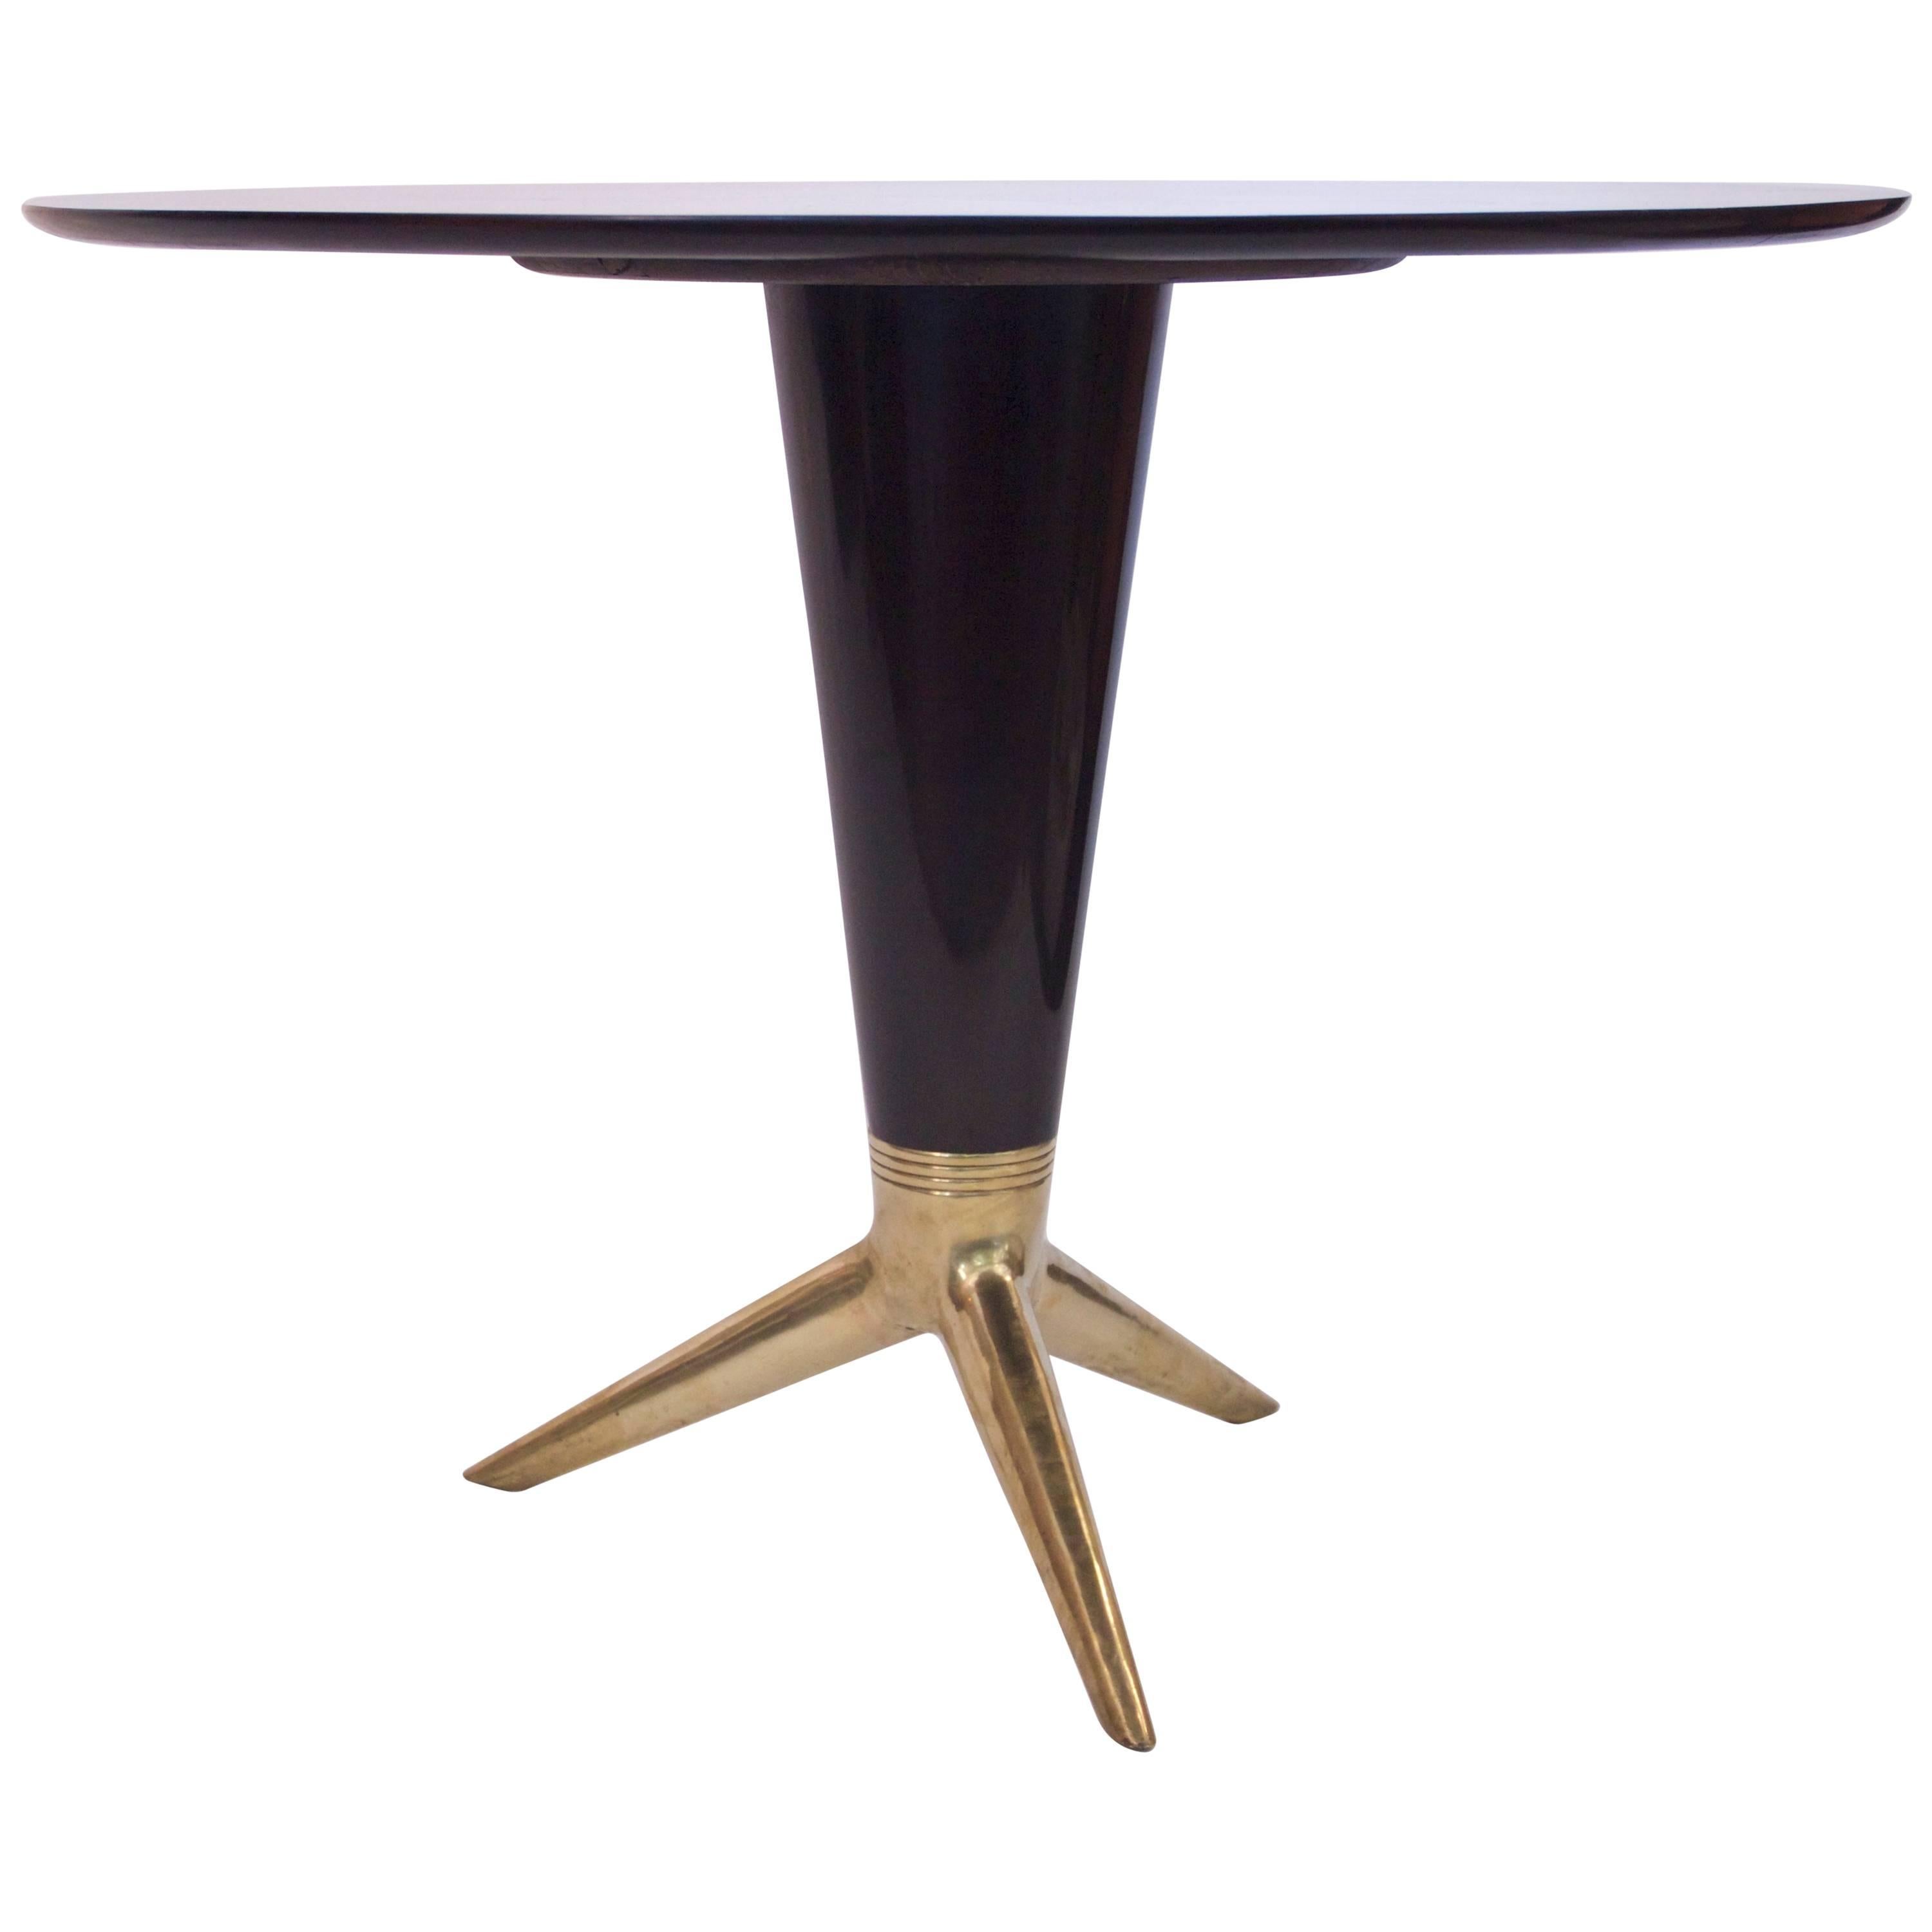 Pedestal Table in the Style of Gio Ponti, Black Lacquered Wood and Gilded Bronze